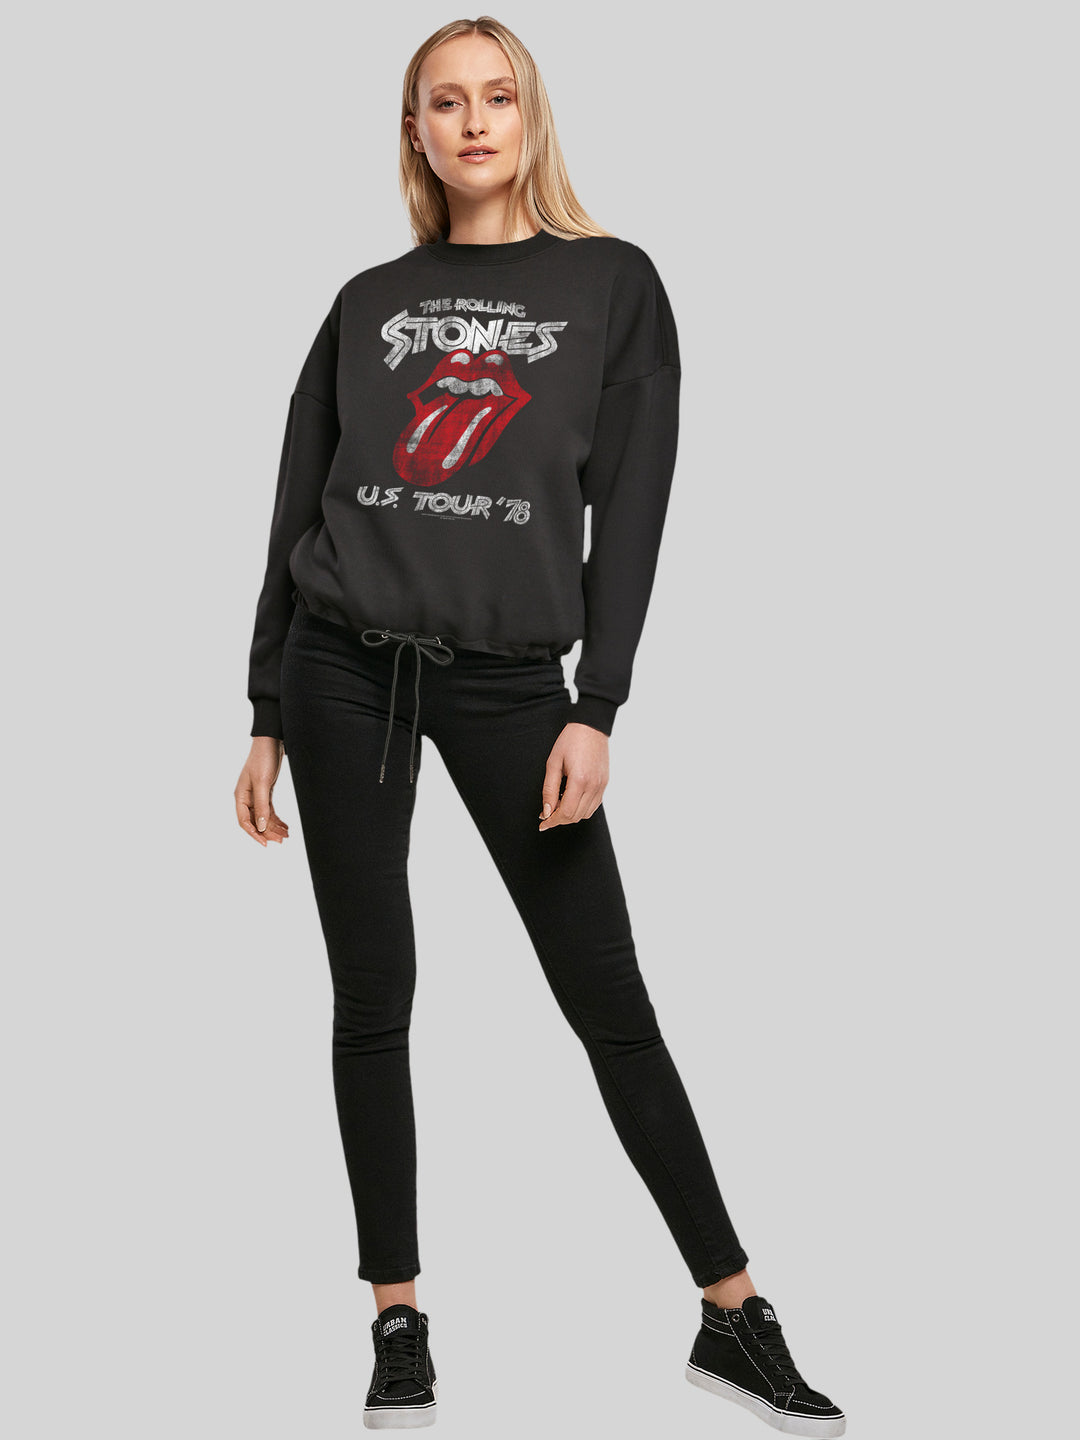 The Rolling Stones US Tour '78 and The Rolling Stones US Tour '78 Black with Ladies Oversize Crewneck